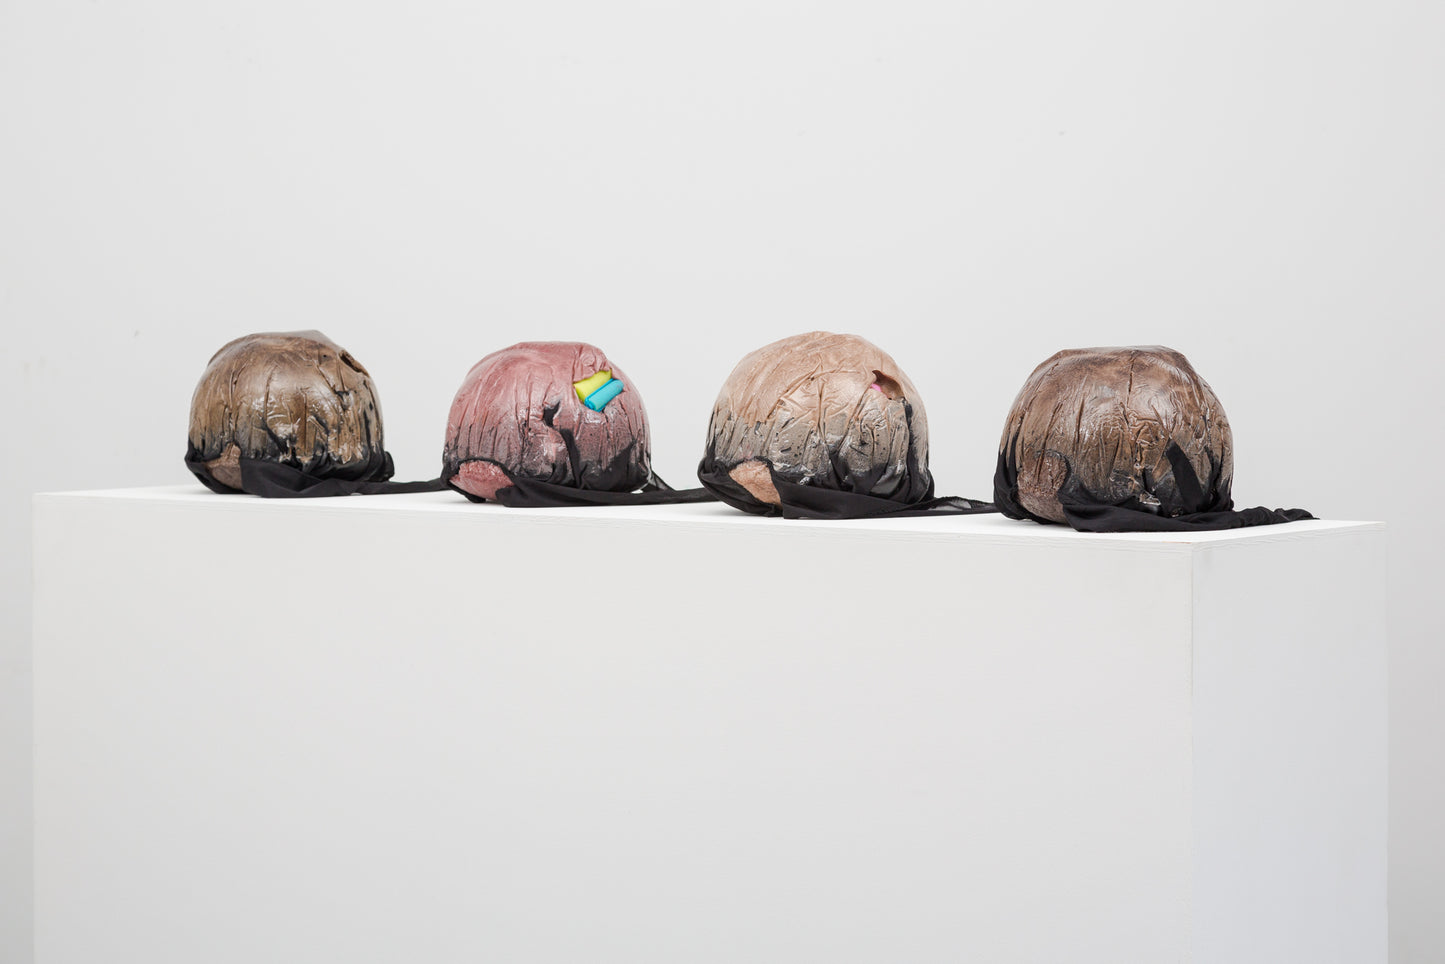 Untitled (Dome), 2015 by Kevin Beasley